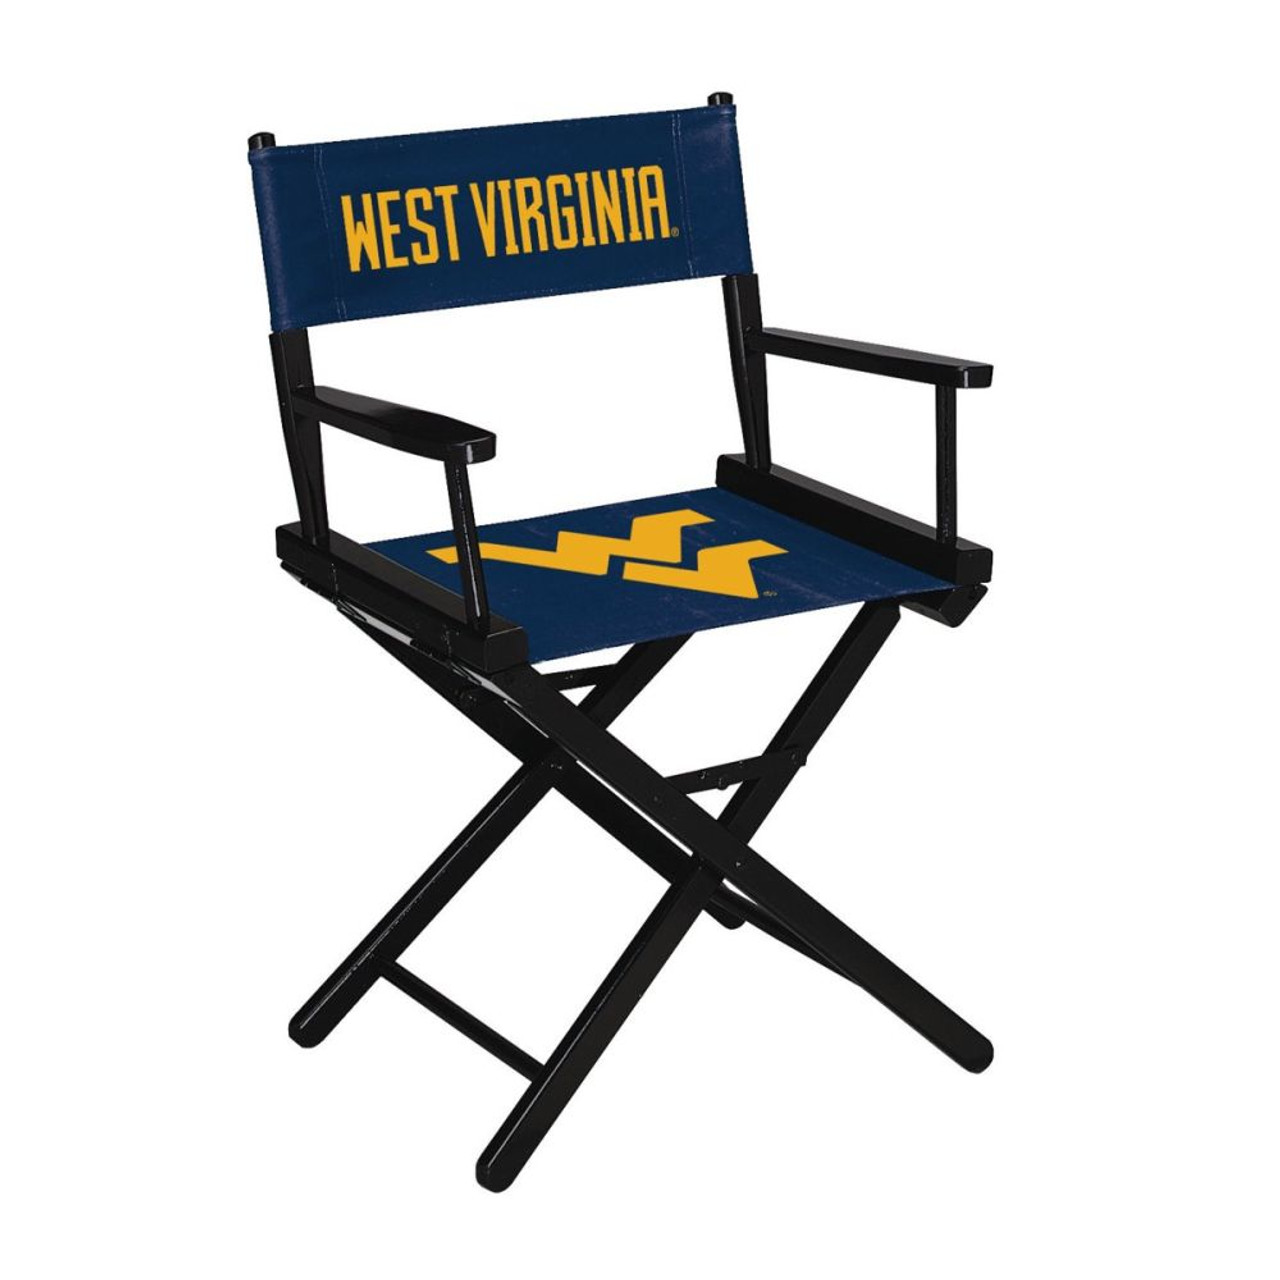 West Virginia, WV, University, Mountaineers, TBL, Table, Height, Directors, Sling, Canvas, Folding, Chair, 301-6051, 720801109800
